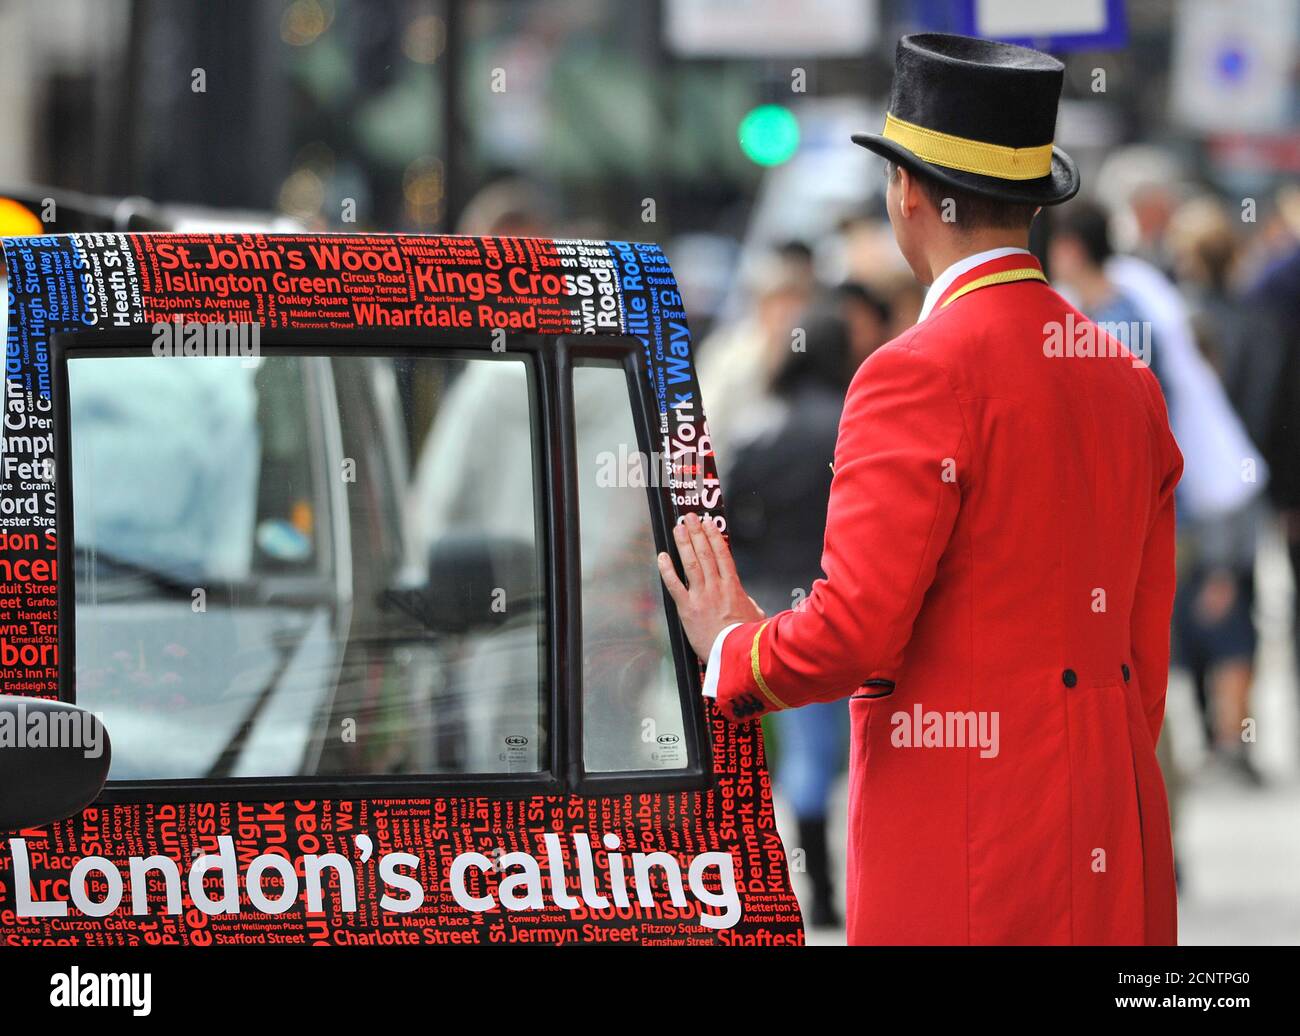 A doorman closes a taxi door outside a hotel in central London September 5, 2011. Activity in the dominant services sector slowed at the fastest pace in a more than a decade last month, and firms' confidence in future business weakened to a one-year low, adding to evidence of a stalling economic recovery.     REUTERS/Toby Melville (BRITAIN - Tags: BUSINESS EMPLOYMENT TRAVEL) Stock Photo